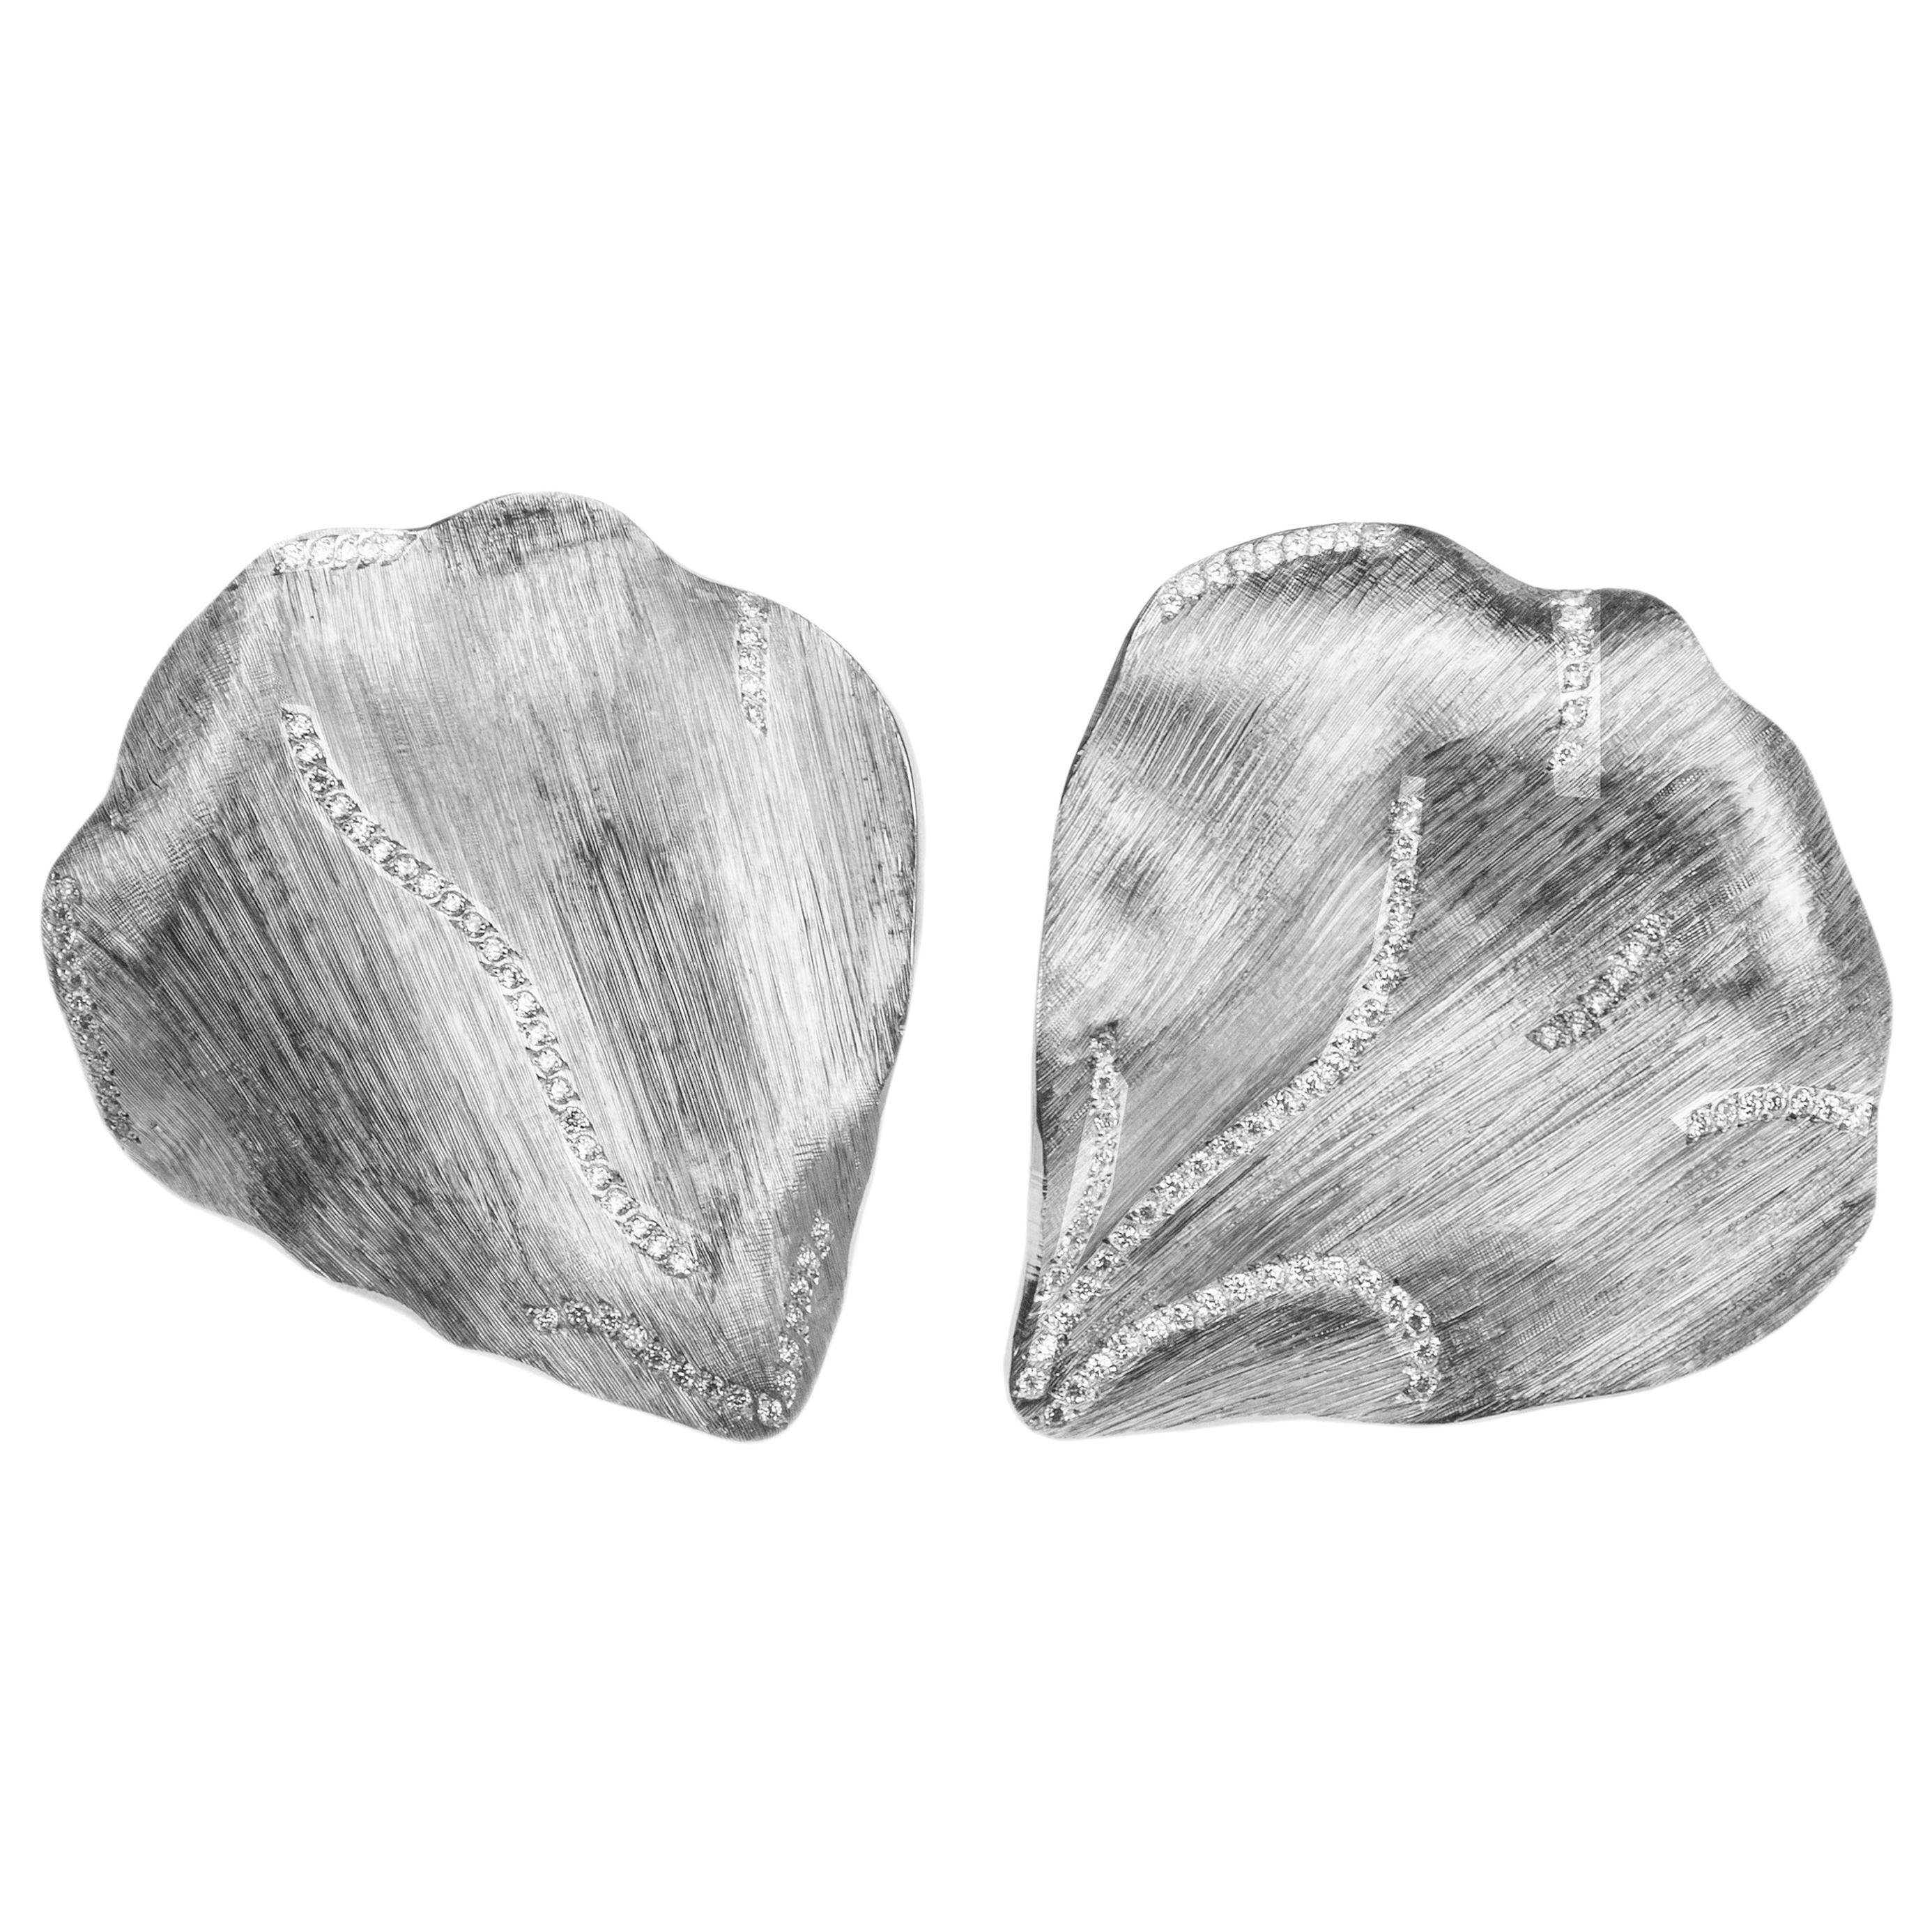 Handgraved White Gold Earrings in the Shape of a Leaf with 0.60 Carat Diamonds